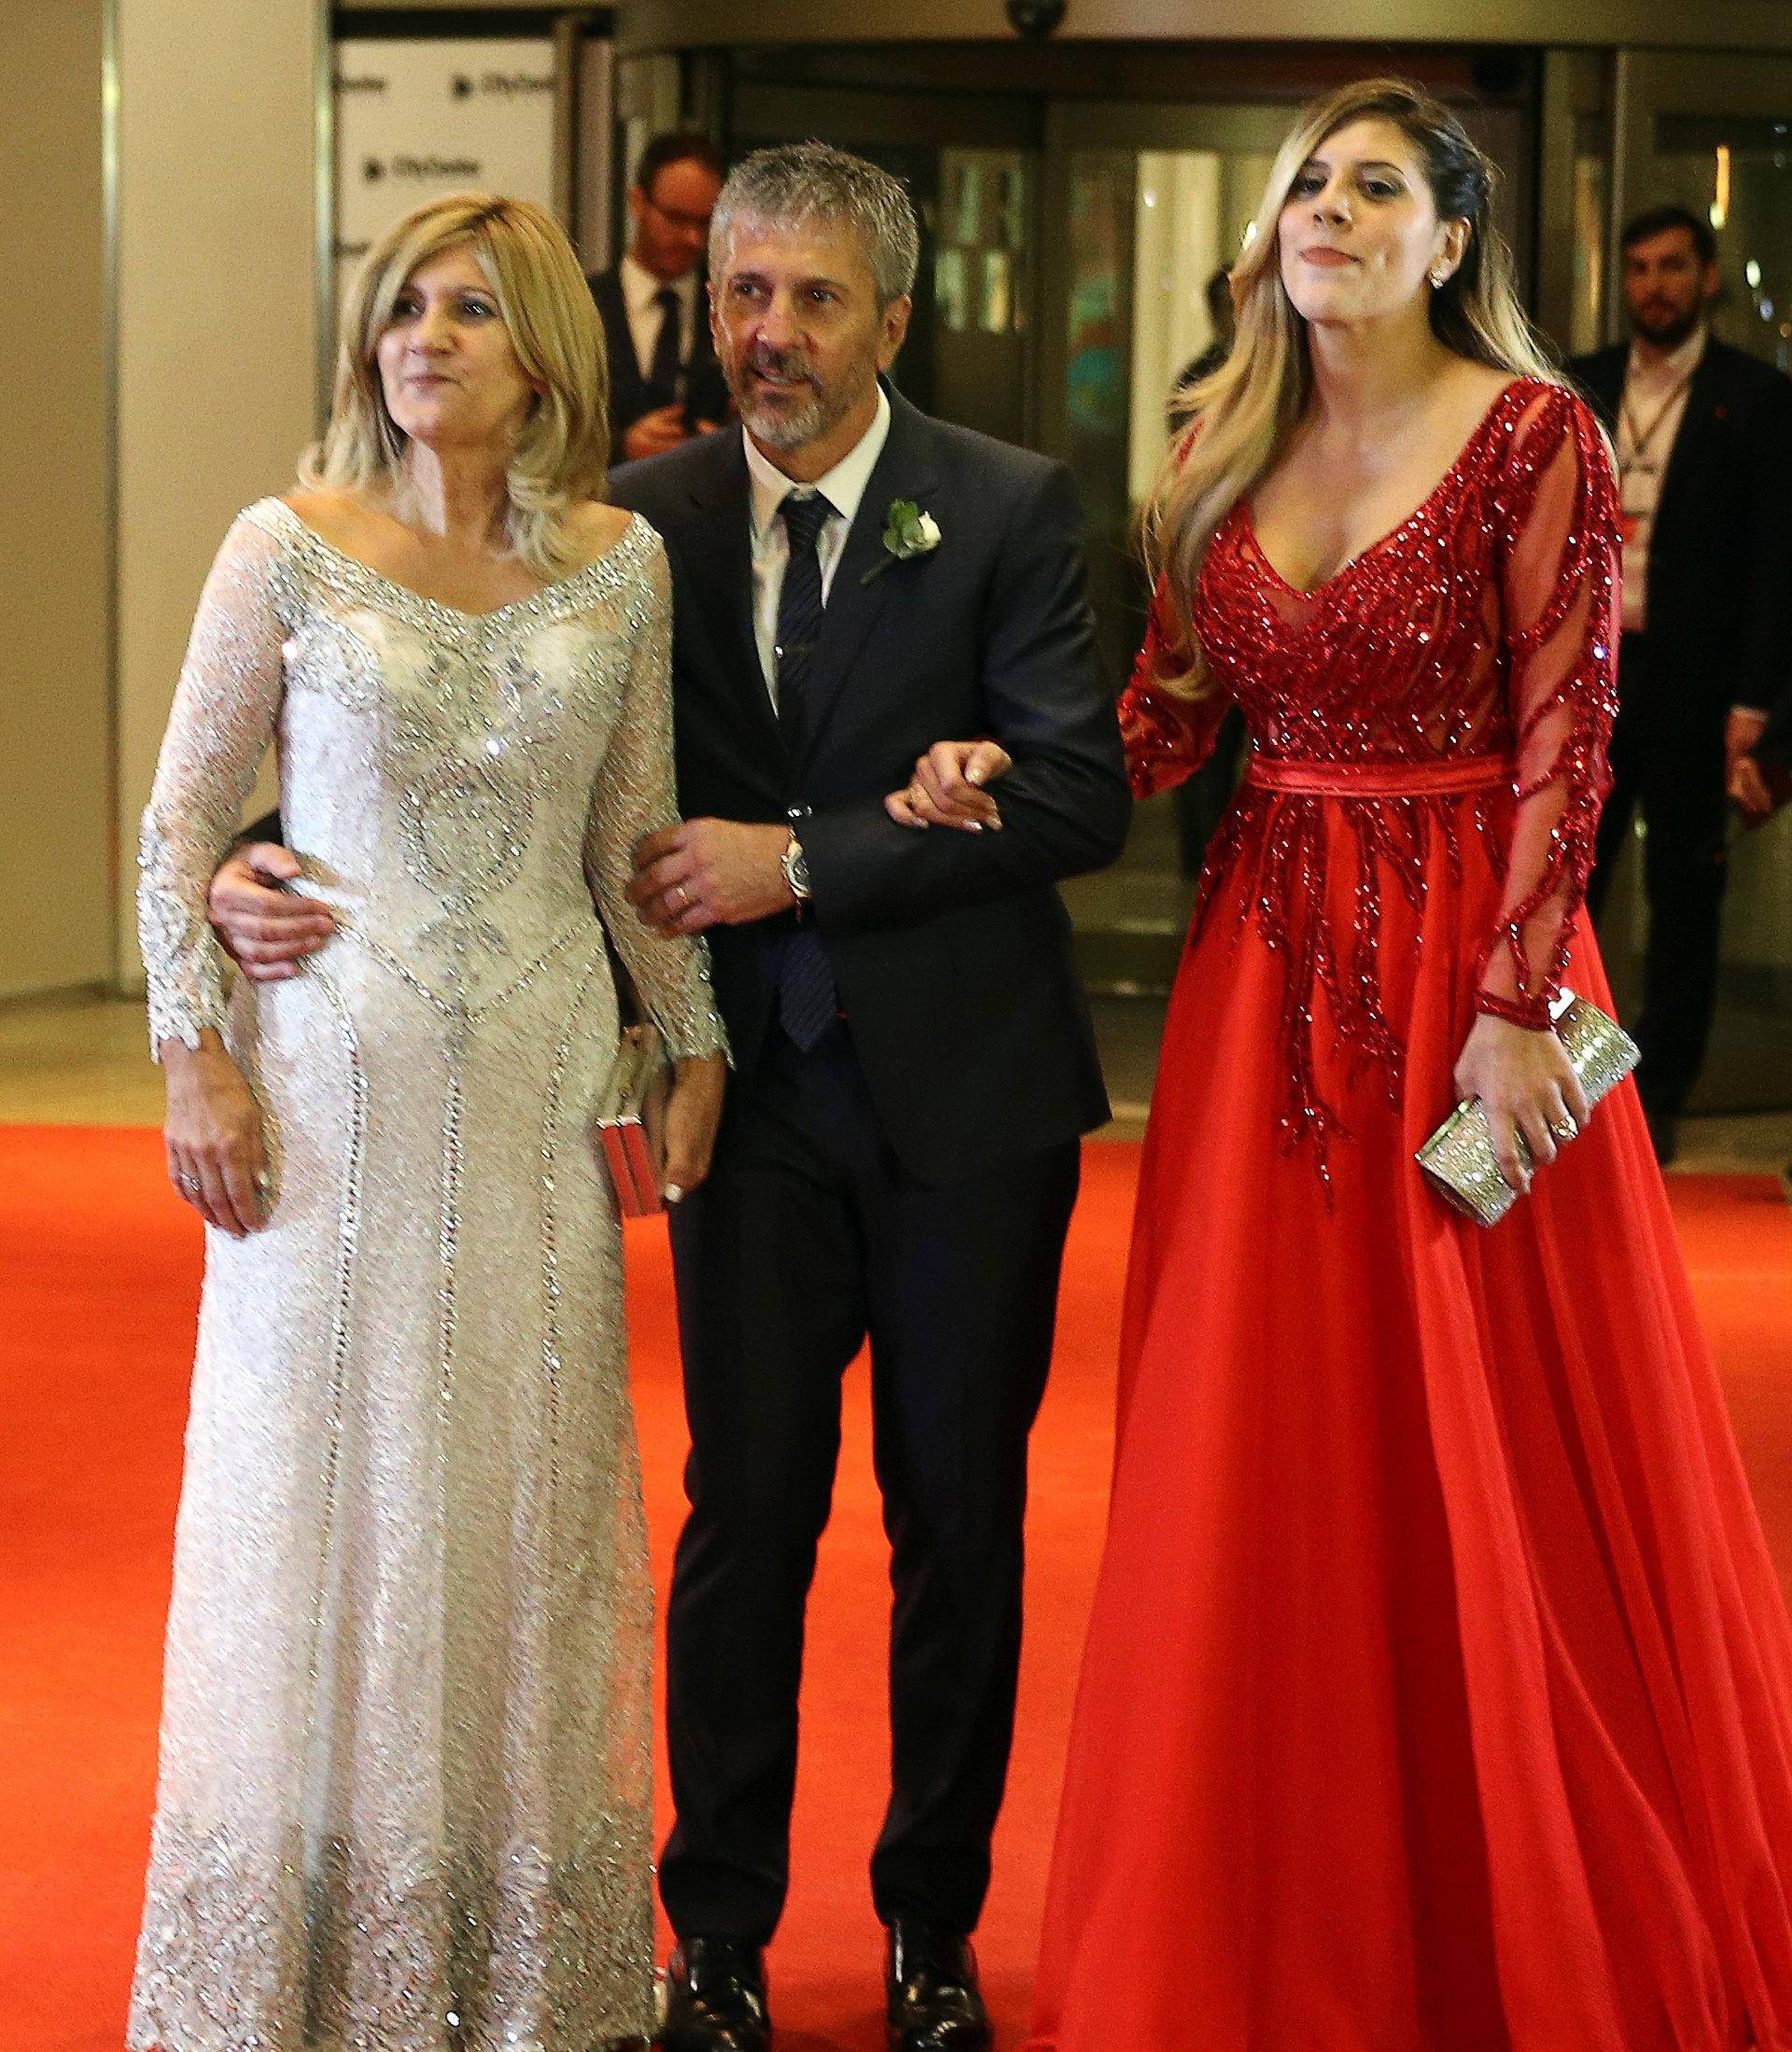 Argentine soccer player Lionel Messi's parents Jorge and Celia and his sister Maria Sol pose at his wedding to Antonela Roccuzzo in Rosario